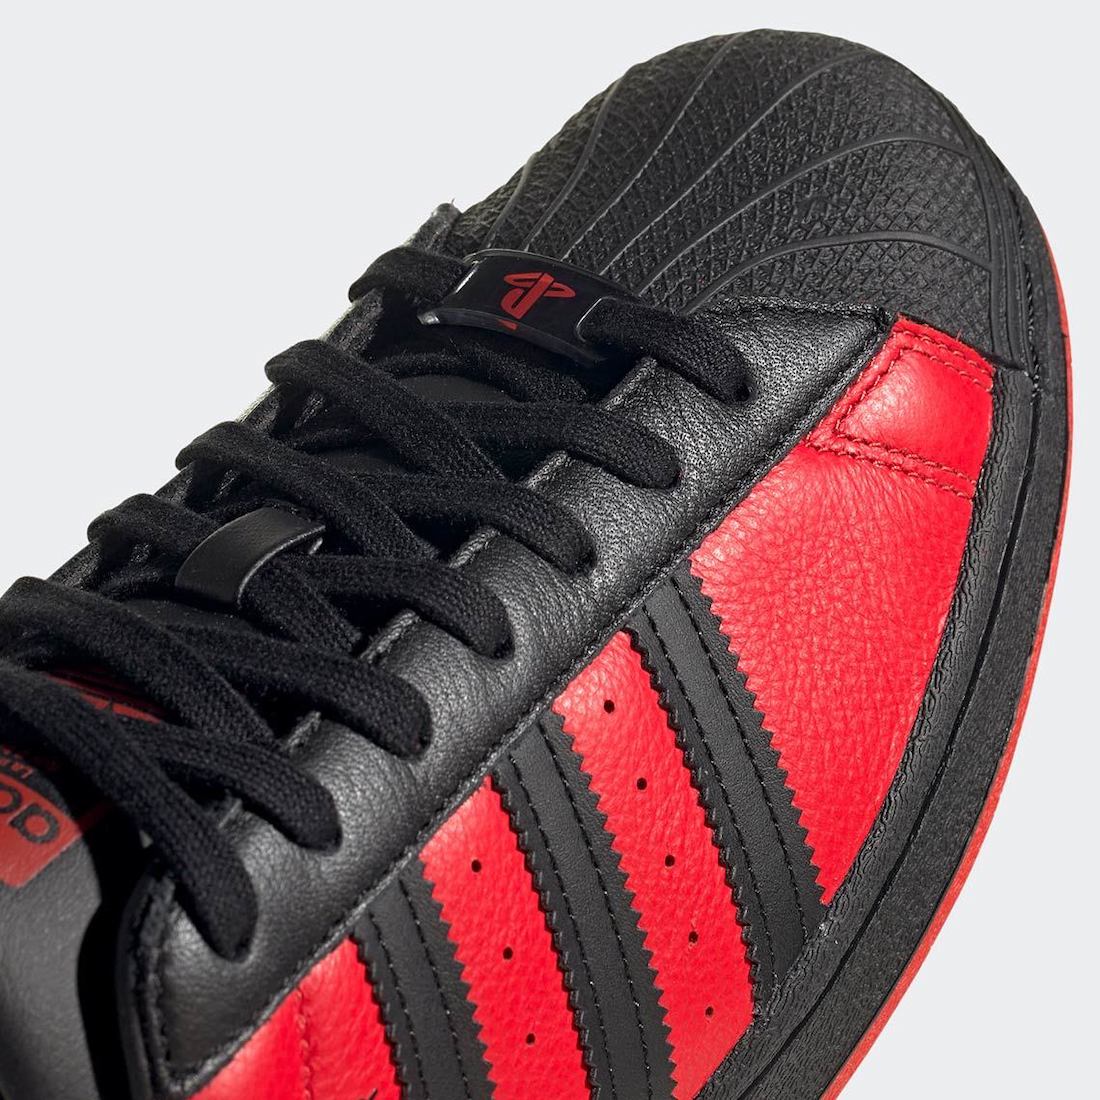 adidas Superstar Miles Morales GV7128 Release Date